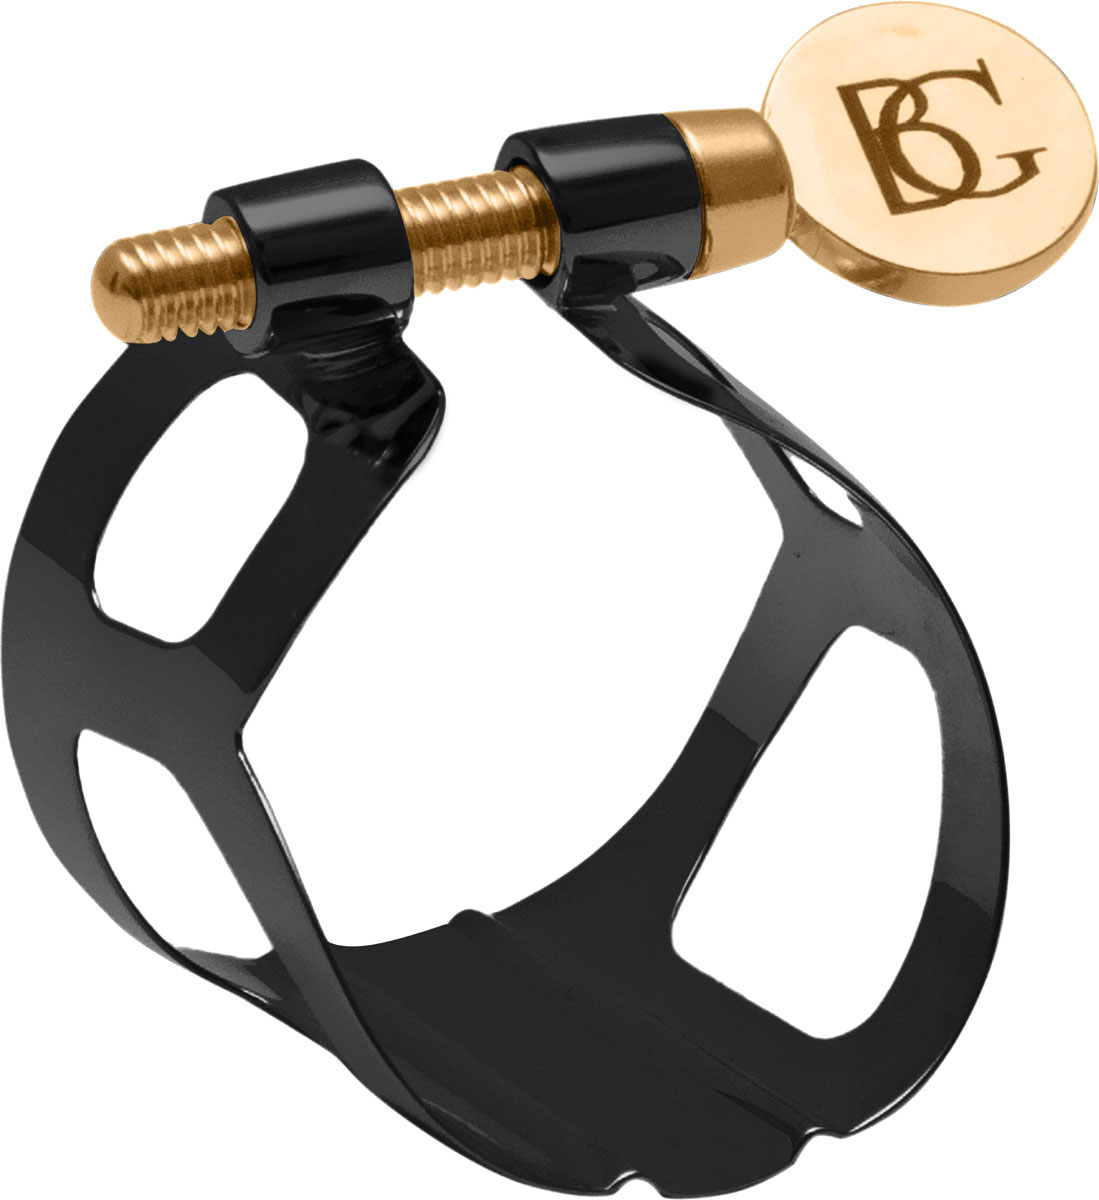 BG FRANCE BLACK LACQUERED DUO LIGATURE - BB CLARINET AND ALTO SAXOPHONE